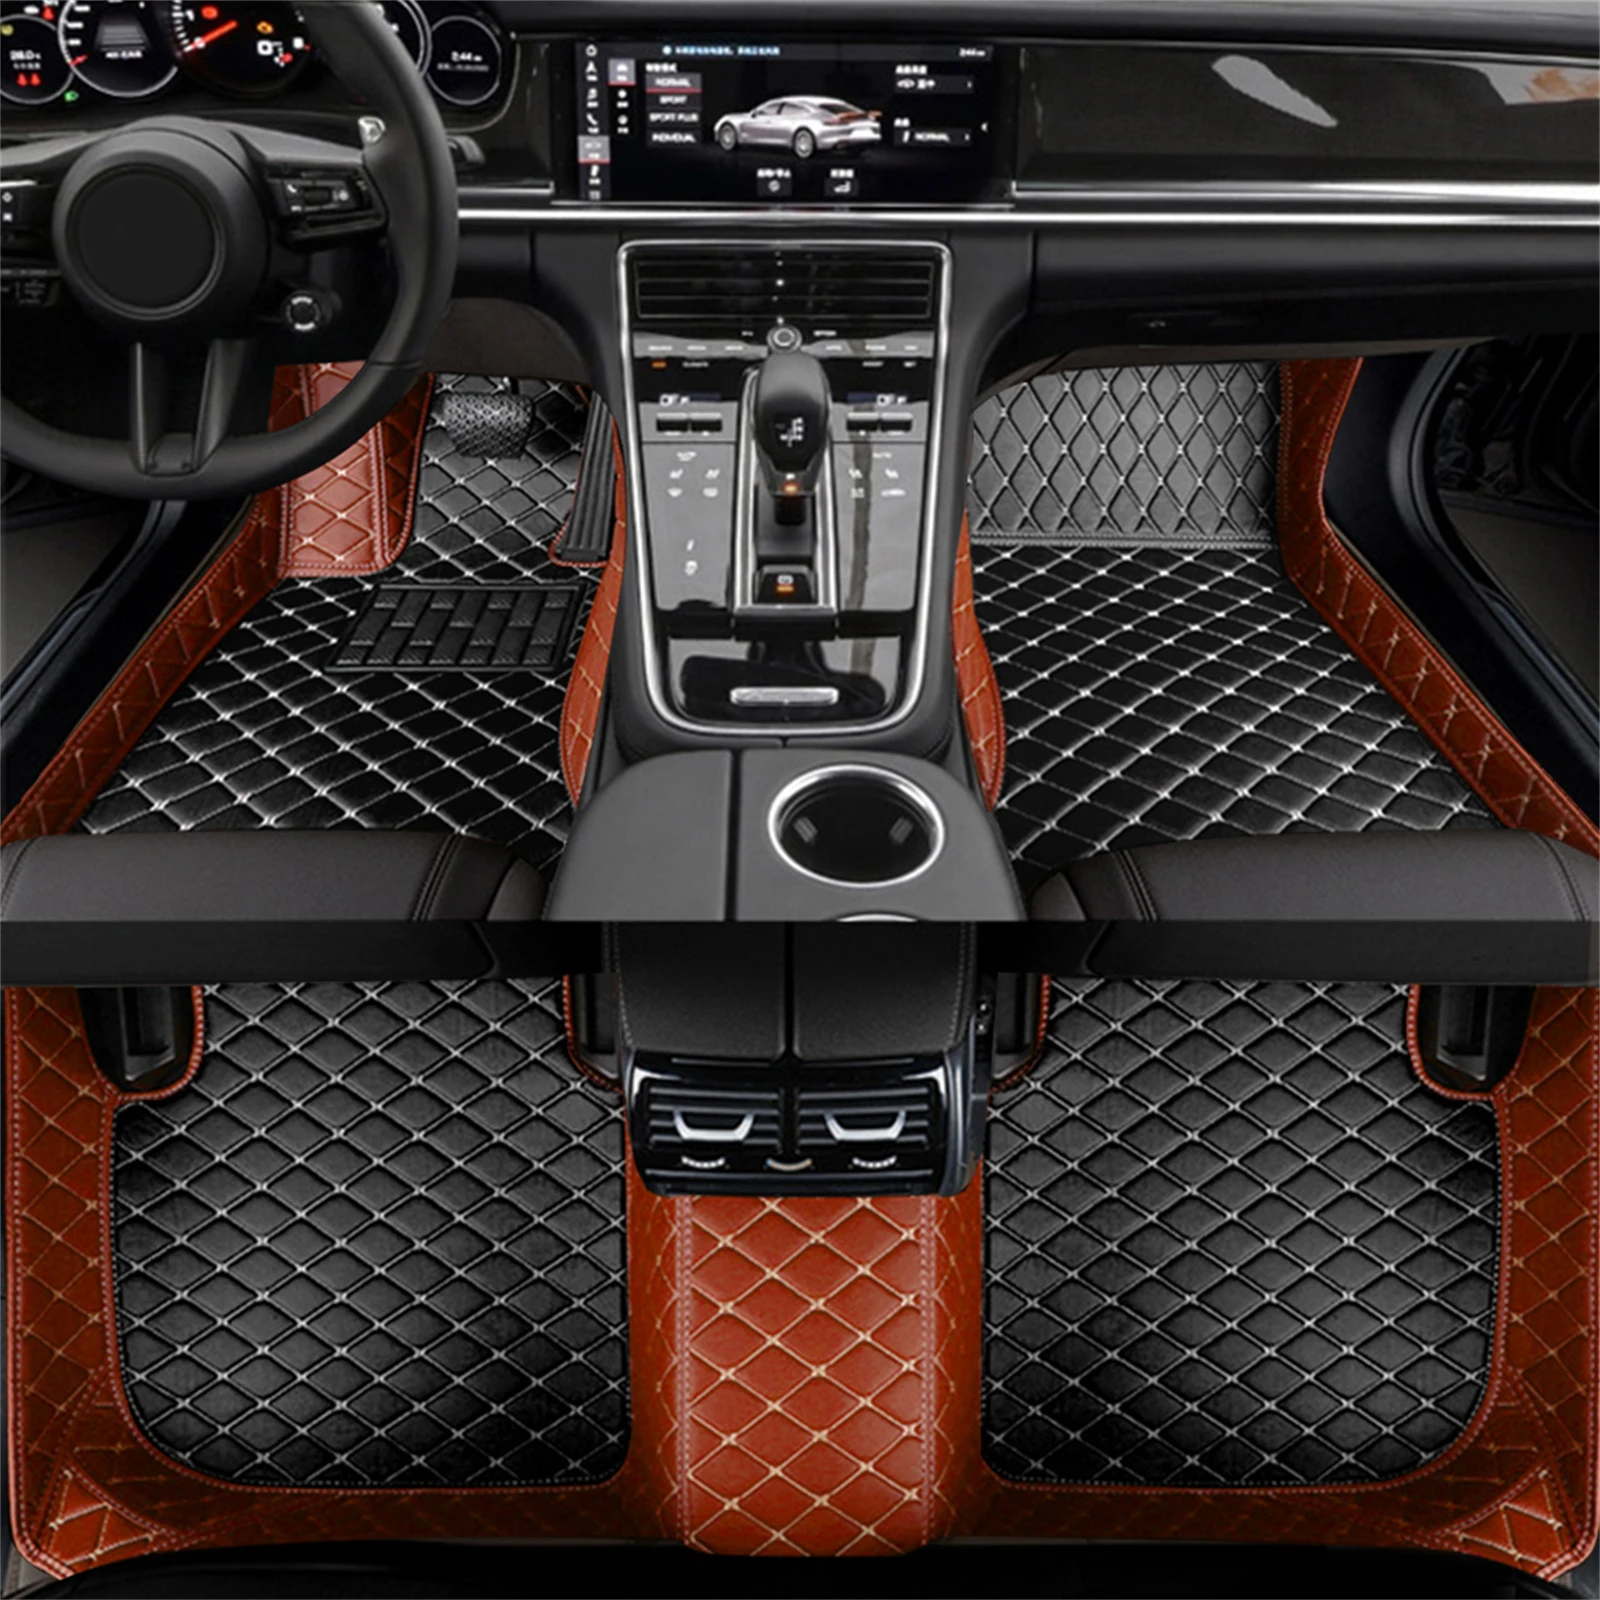 

Artificial Leather Custom Car Floor Mats for Mercedes Benz GLS 7 Seat 2016-2019 Year Interior Details Car Accessories